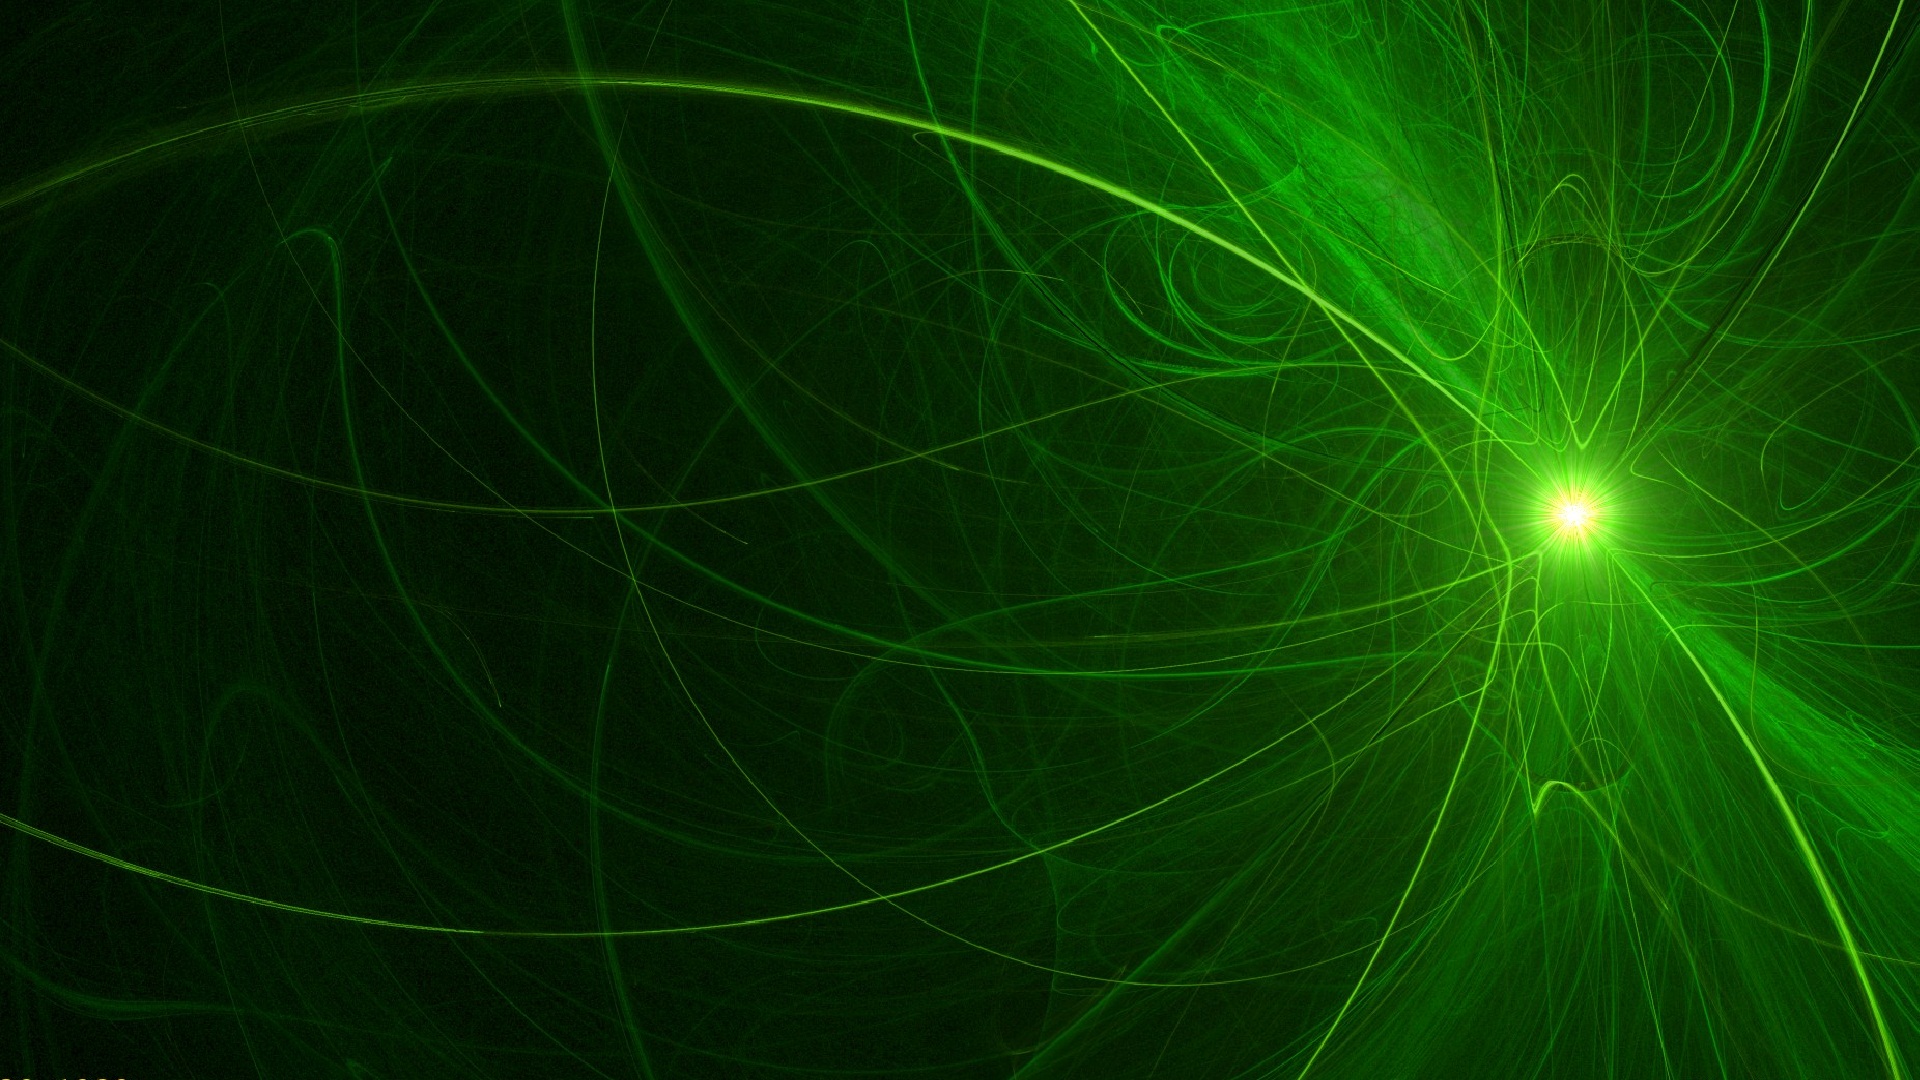 Black and Green Wallpaper HD With Resolution 1920X1080 pixel. You can make this wallpaper for your Desktop Computer Backgrounds, Mac Wallpapers, Android Lock screen or iPhone Screensavers